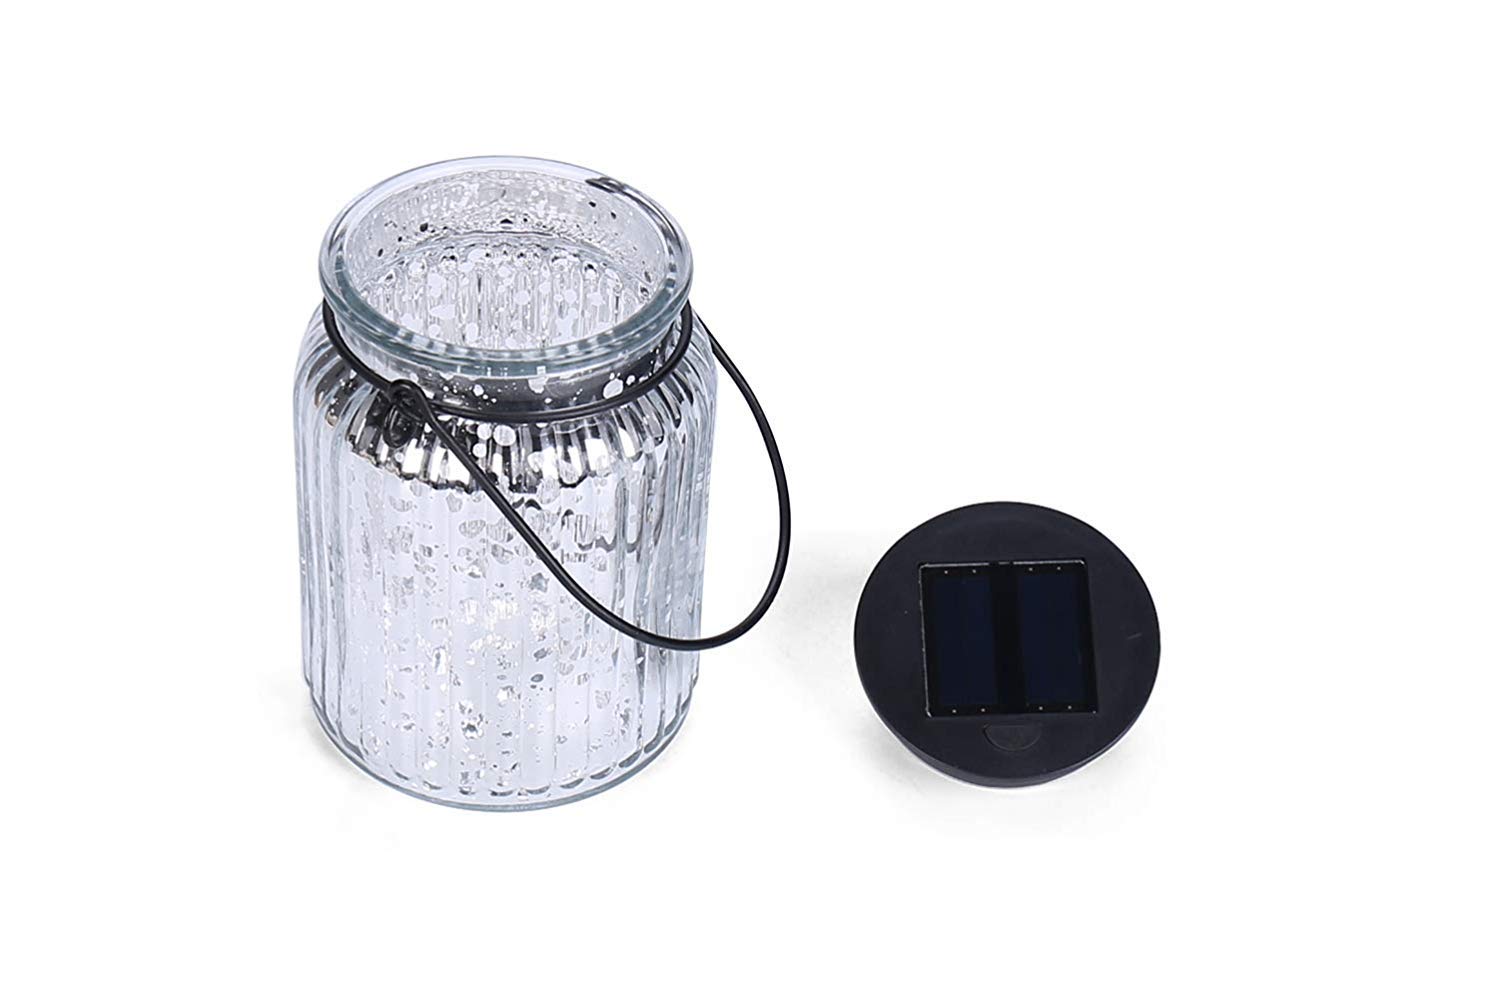 voona Hanging Solar Garden Lights Outdoor Patio Table Lamps Portable Mercury Glass Jars Solar Powered for Patio Lawn Backyard Landscaping Decor (Silver)